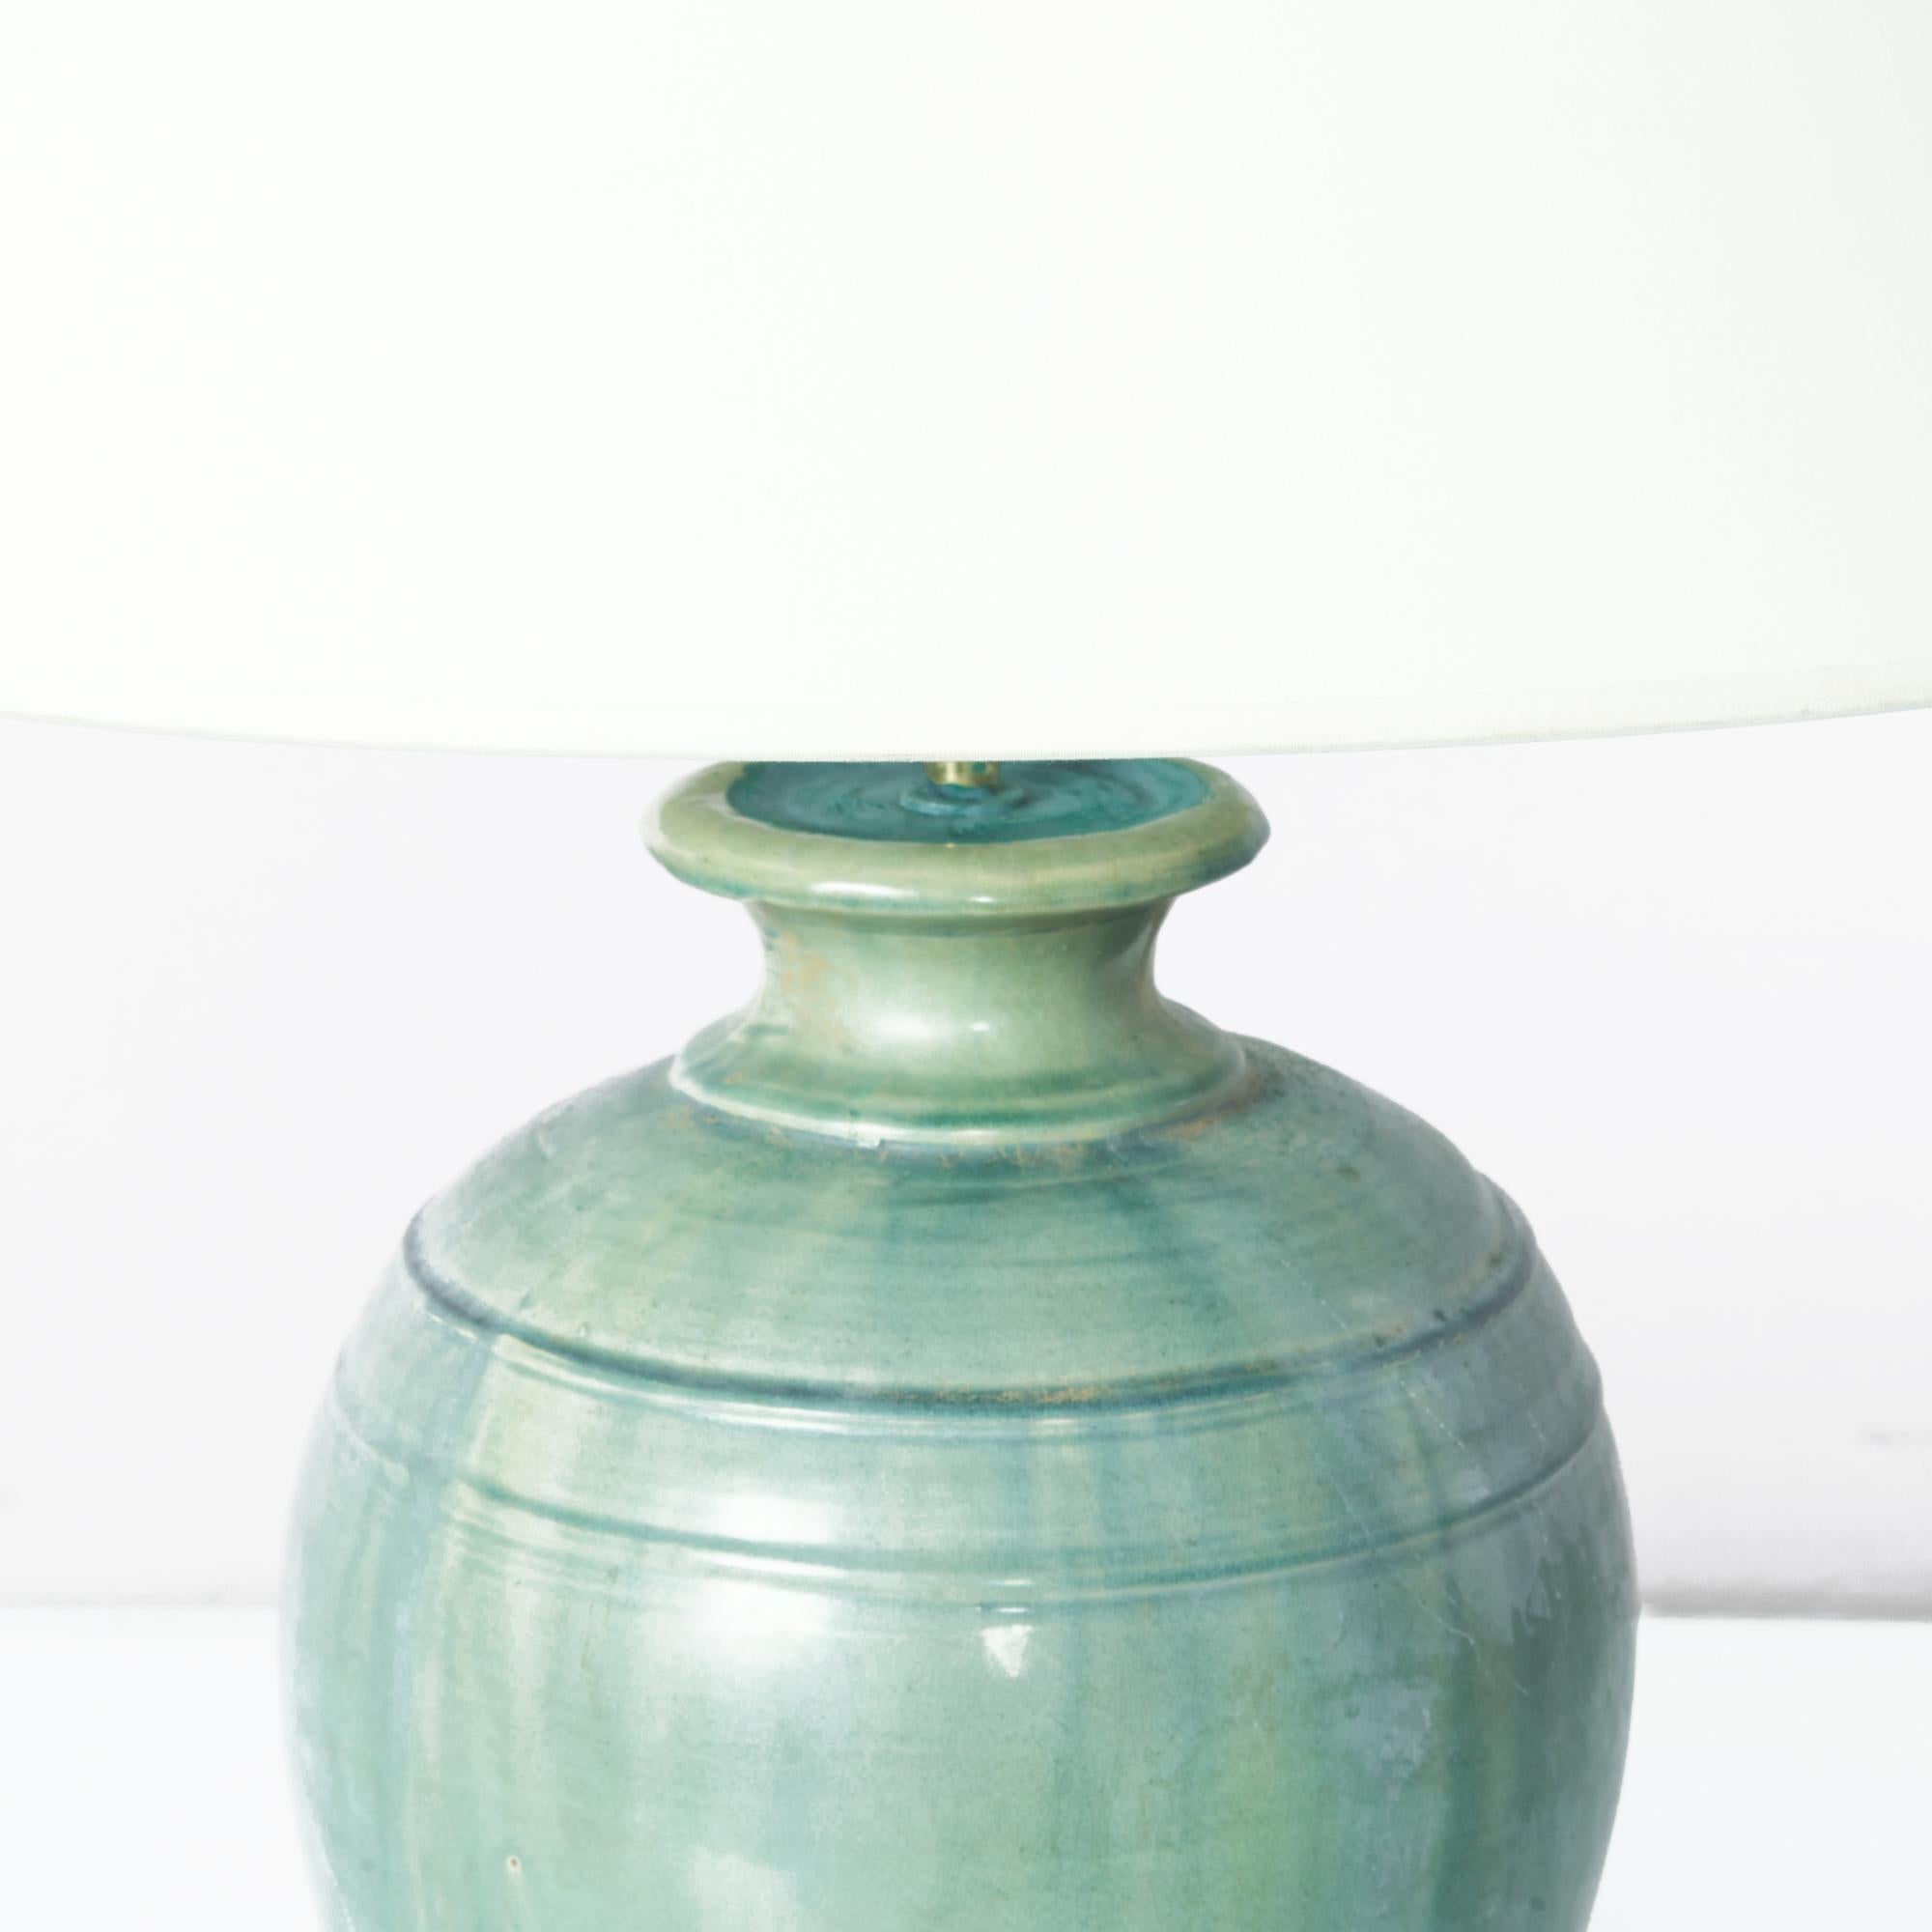 This finely crafted vintage Chinese vase has been fitted with an adjustable brass fixture and E26 lighting socket. Textured glazes, attractive colors and clean modern forms make this a great fit for neutral contemporary interiors. 26.8